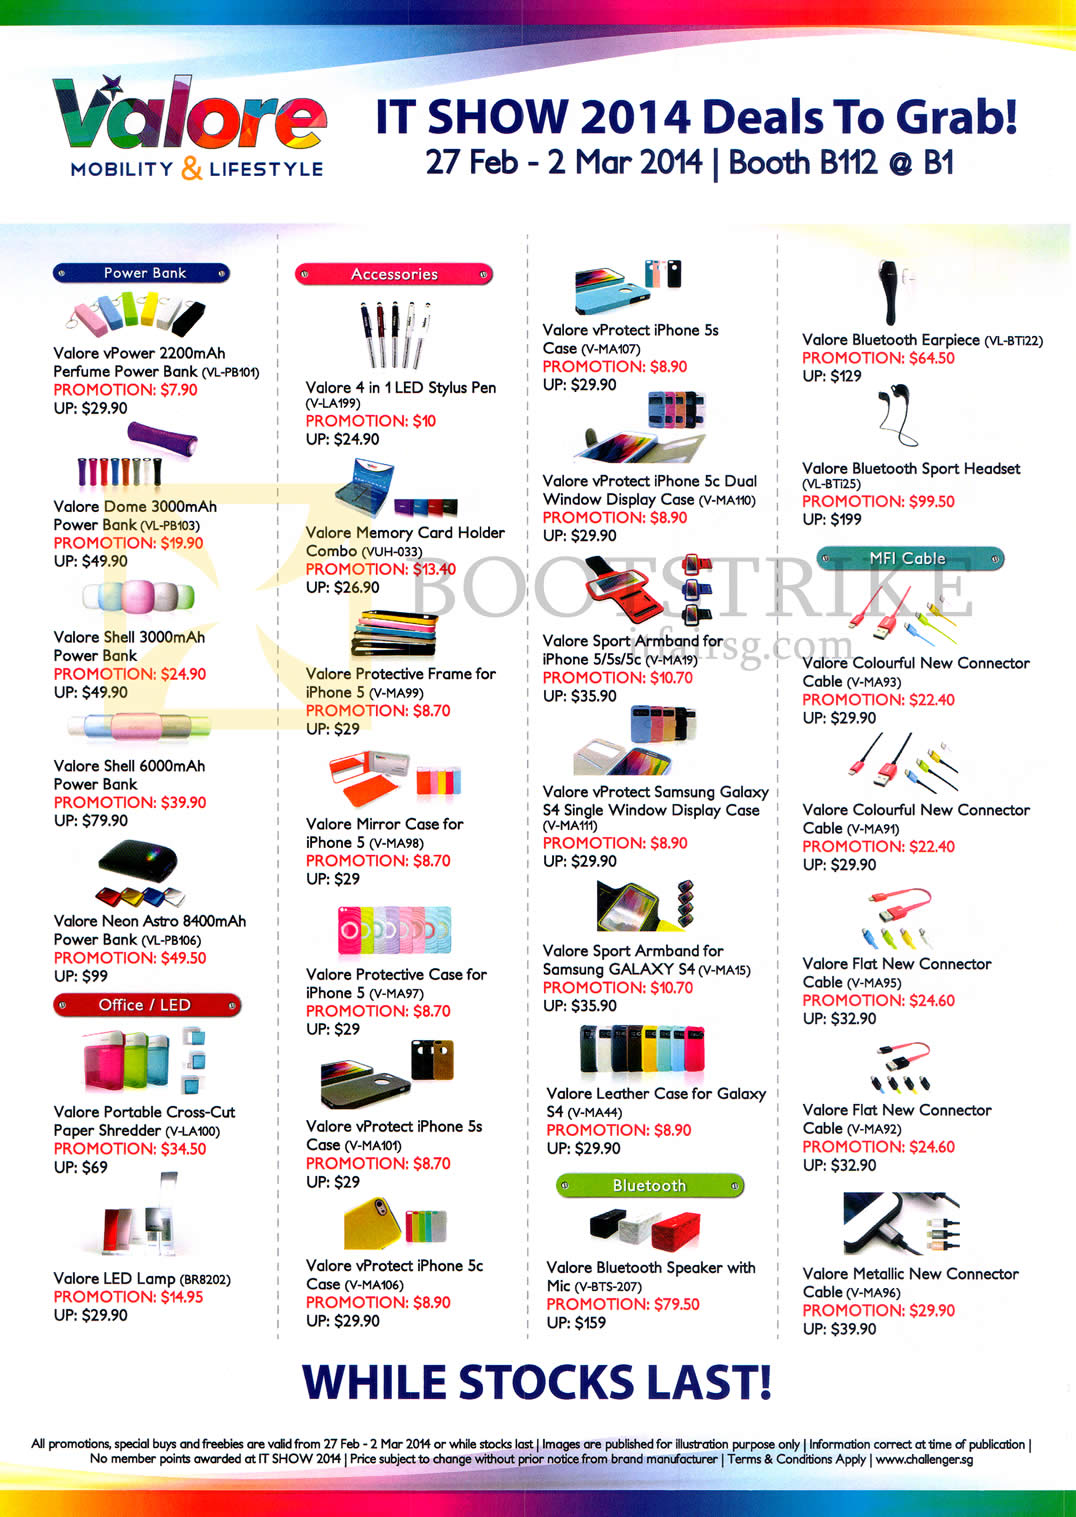 IT SHOW 2014 price list image brochure of Challenger Valore Accessories Power Bank, Office, LED, Cable